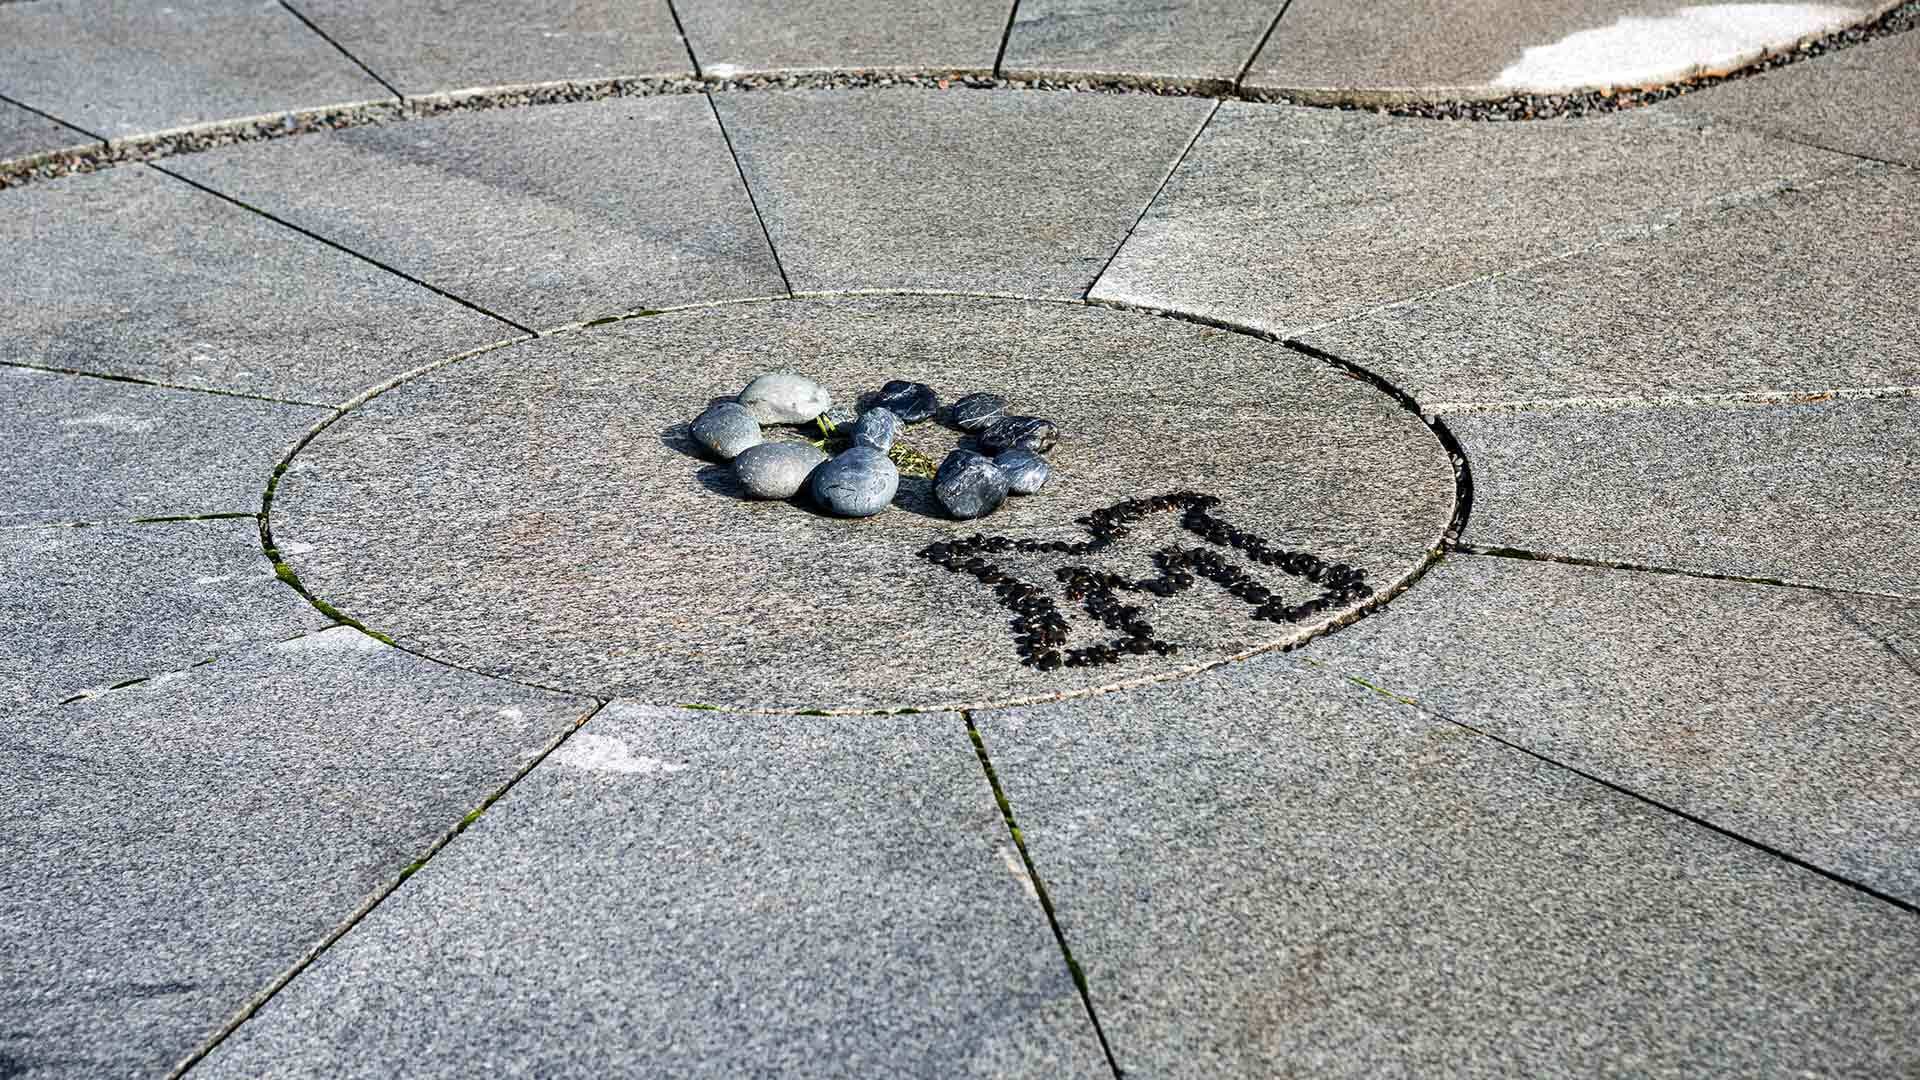 Rocks and a black "M" in the Labyrinth